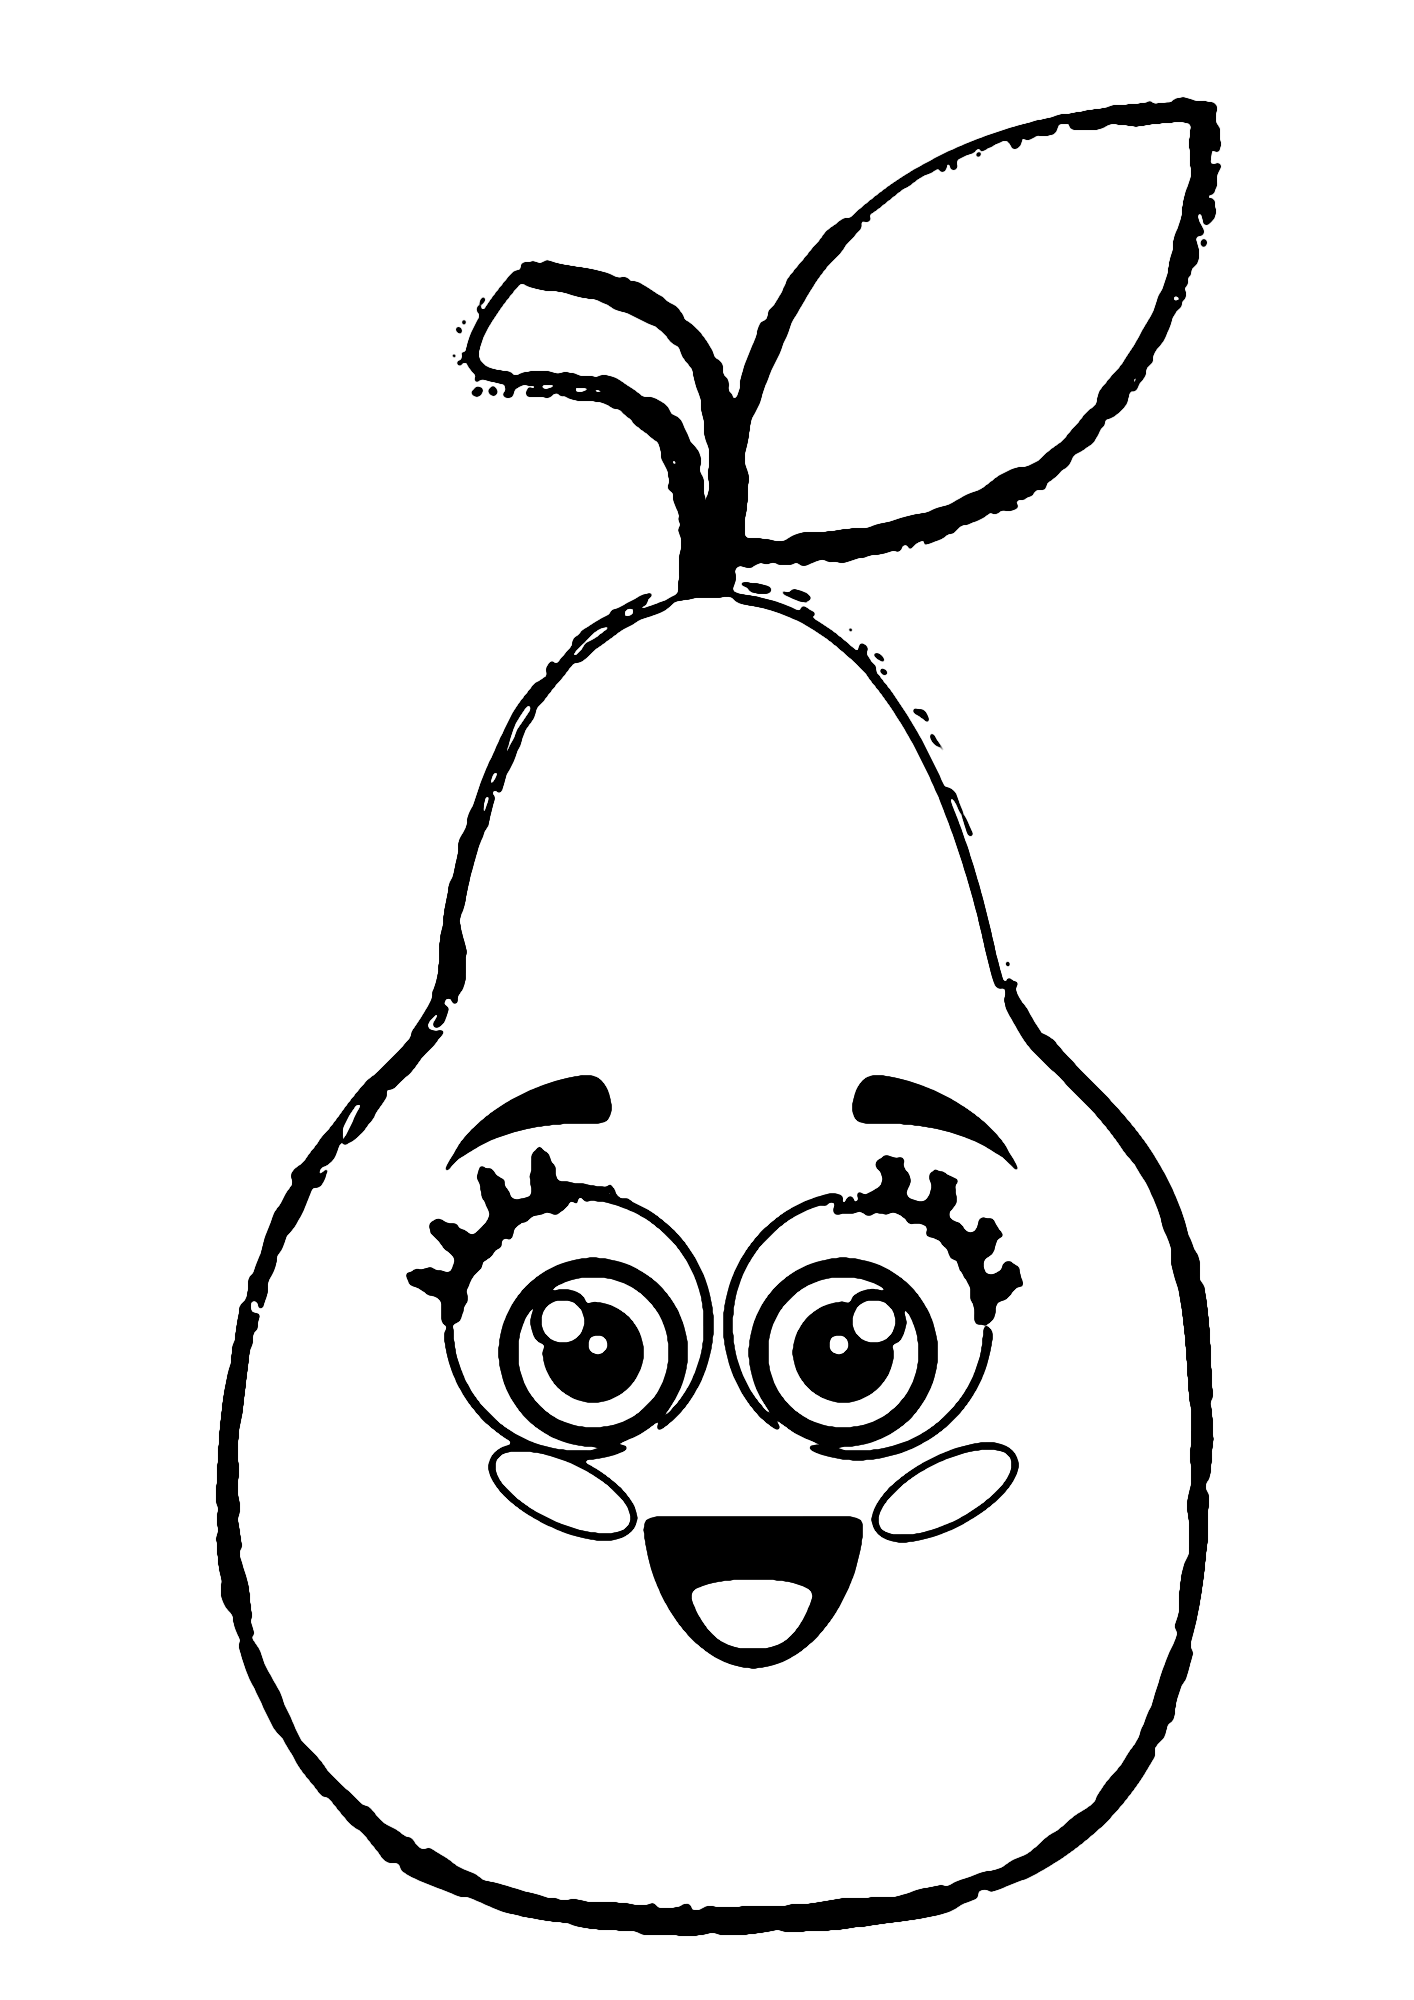 Image Of Pear Coloring Page